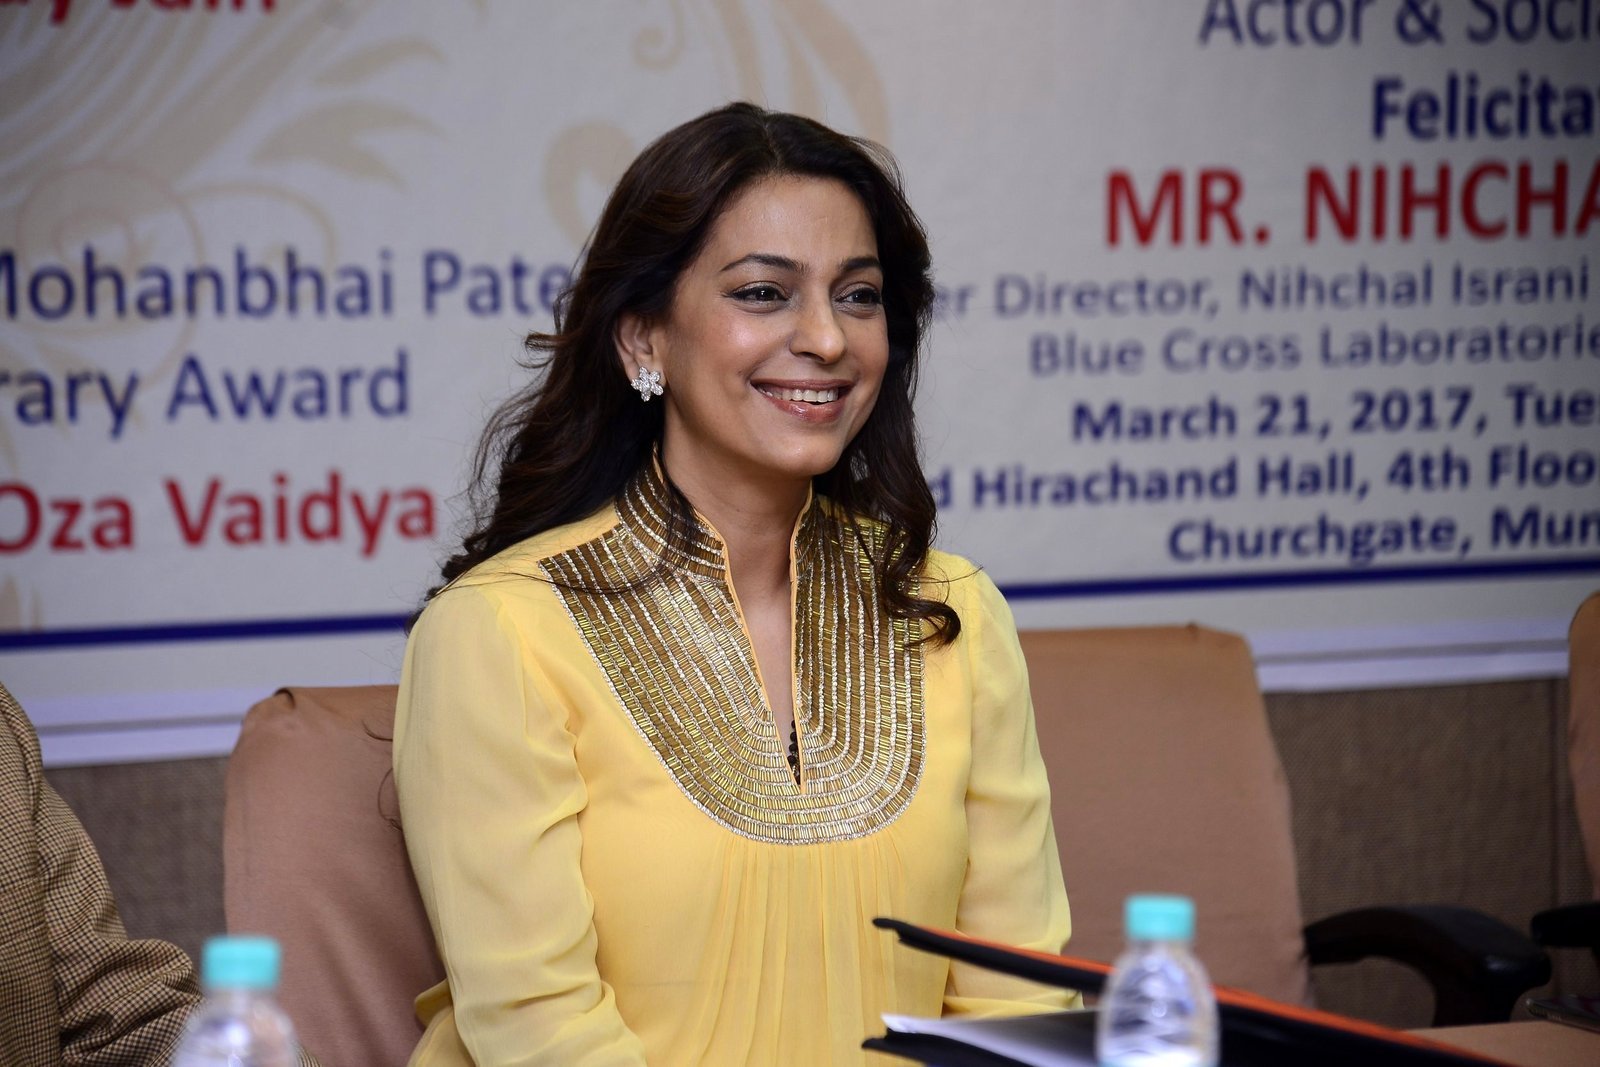  Juhi Chawla during Priyadarshni Academy's 33rd Anniversary Literary Awards Pictures | Picture 1485188